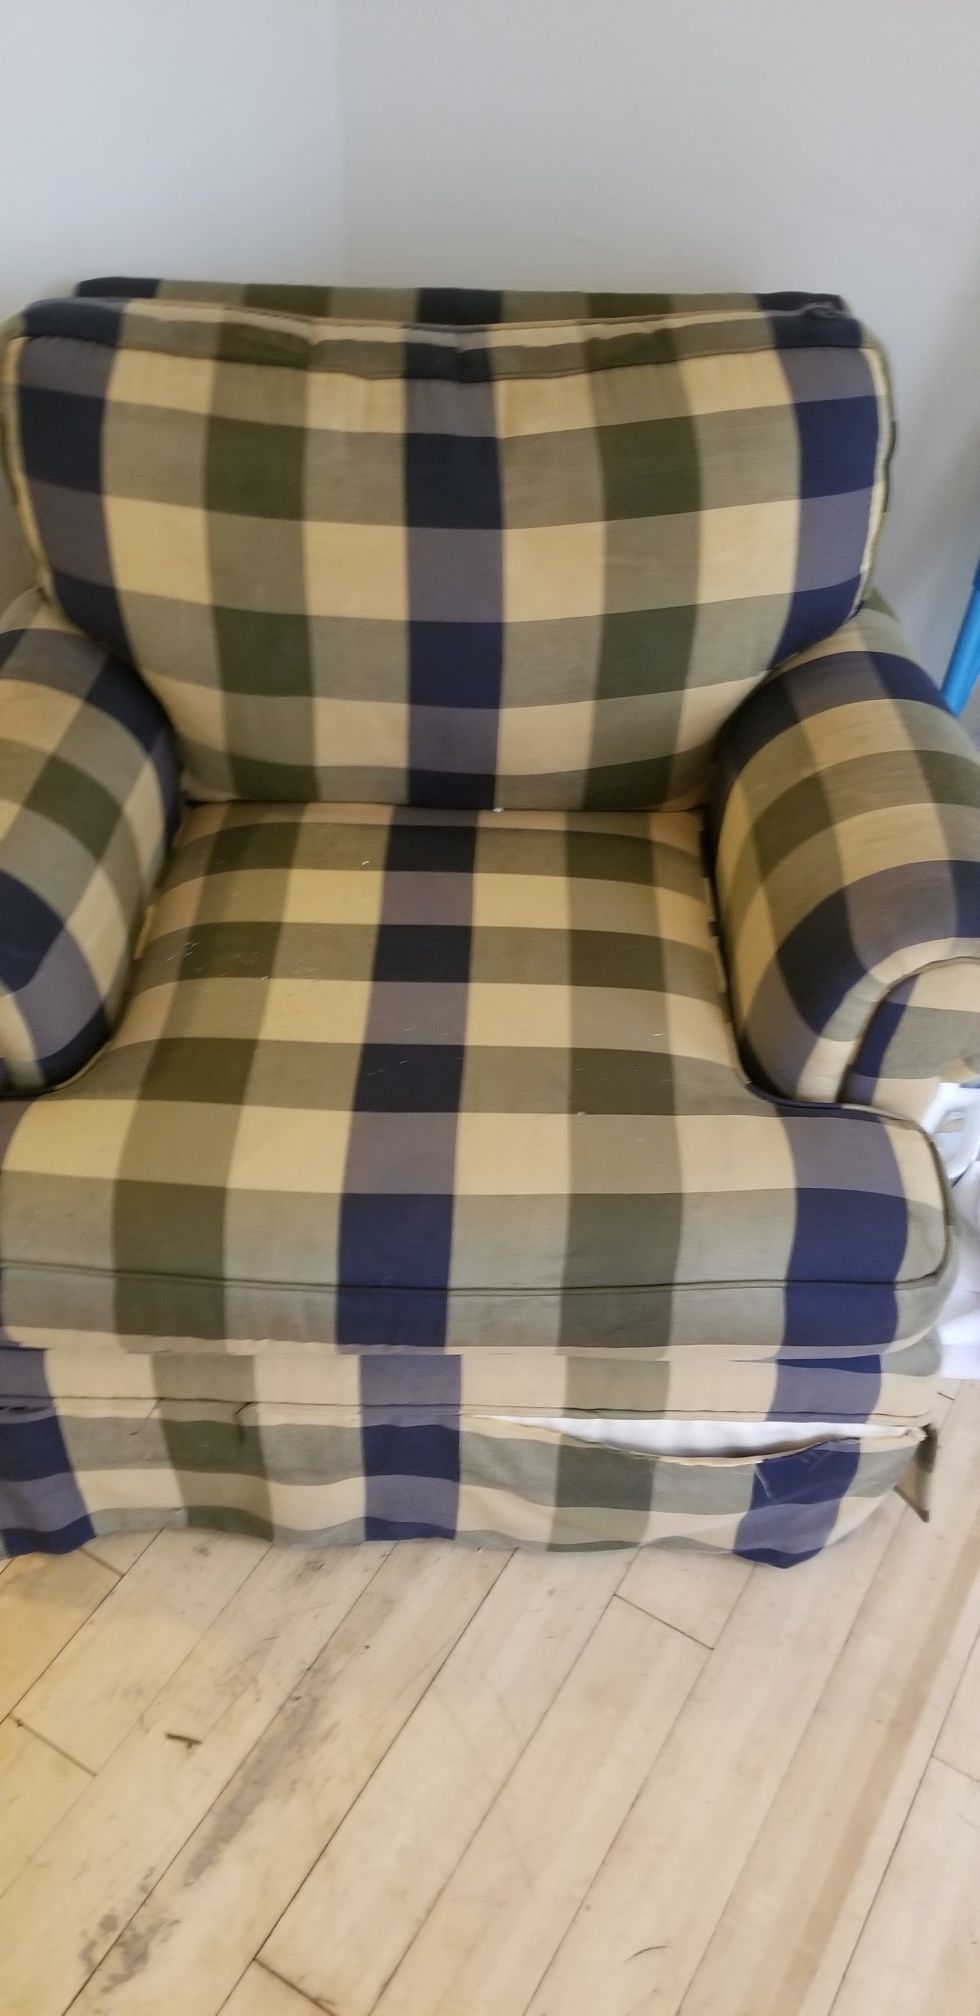 CHAIRS FOR FREE